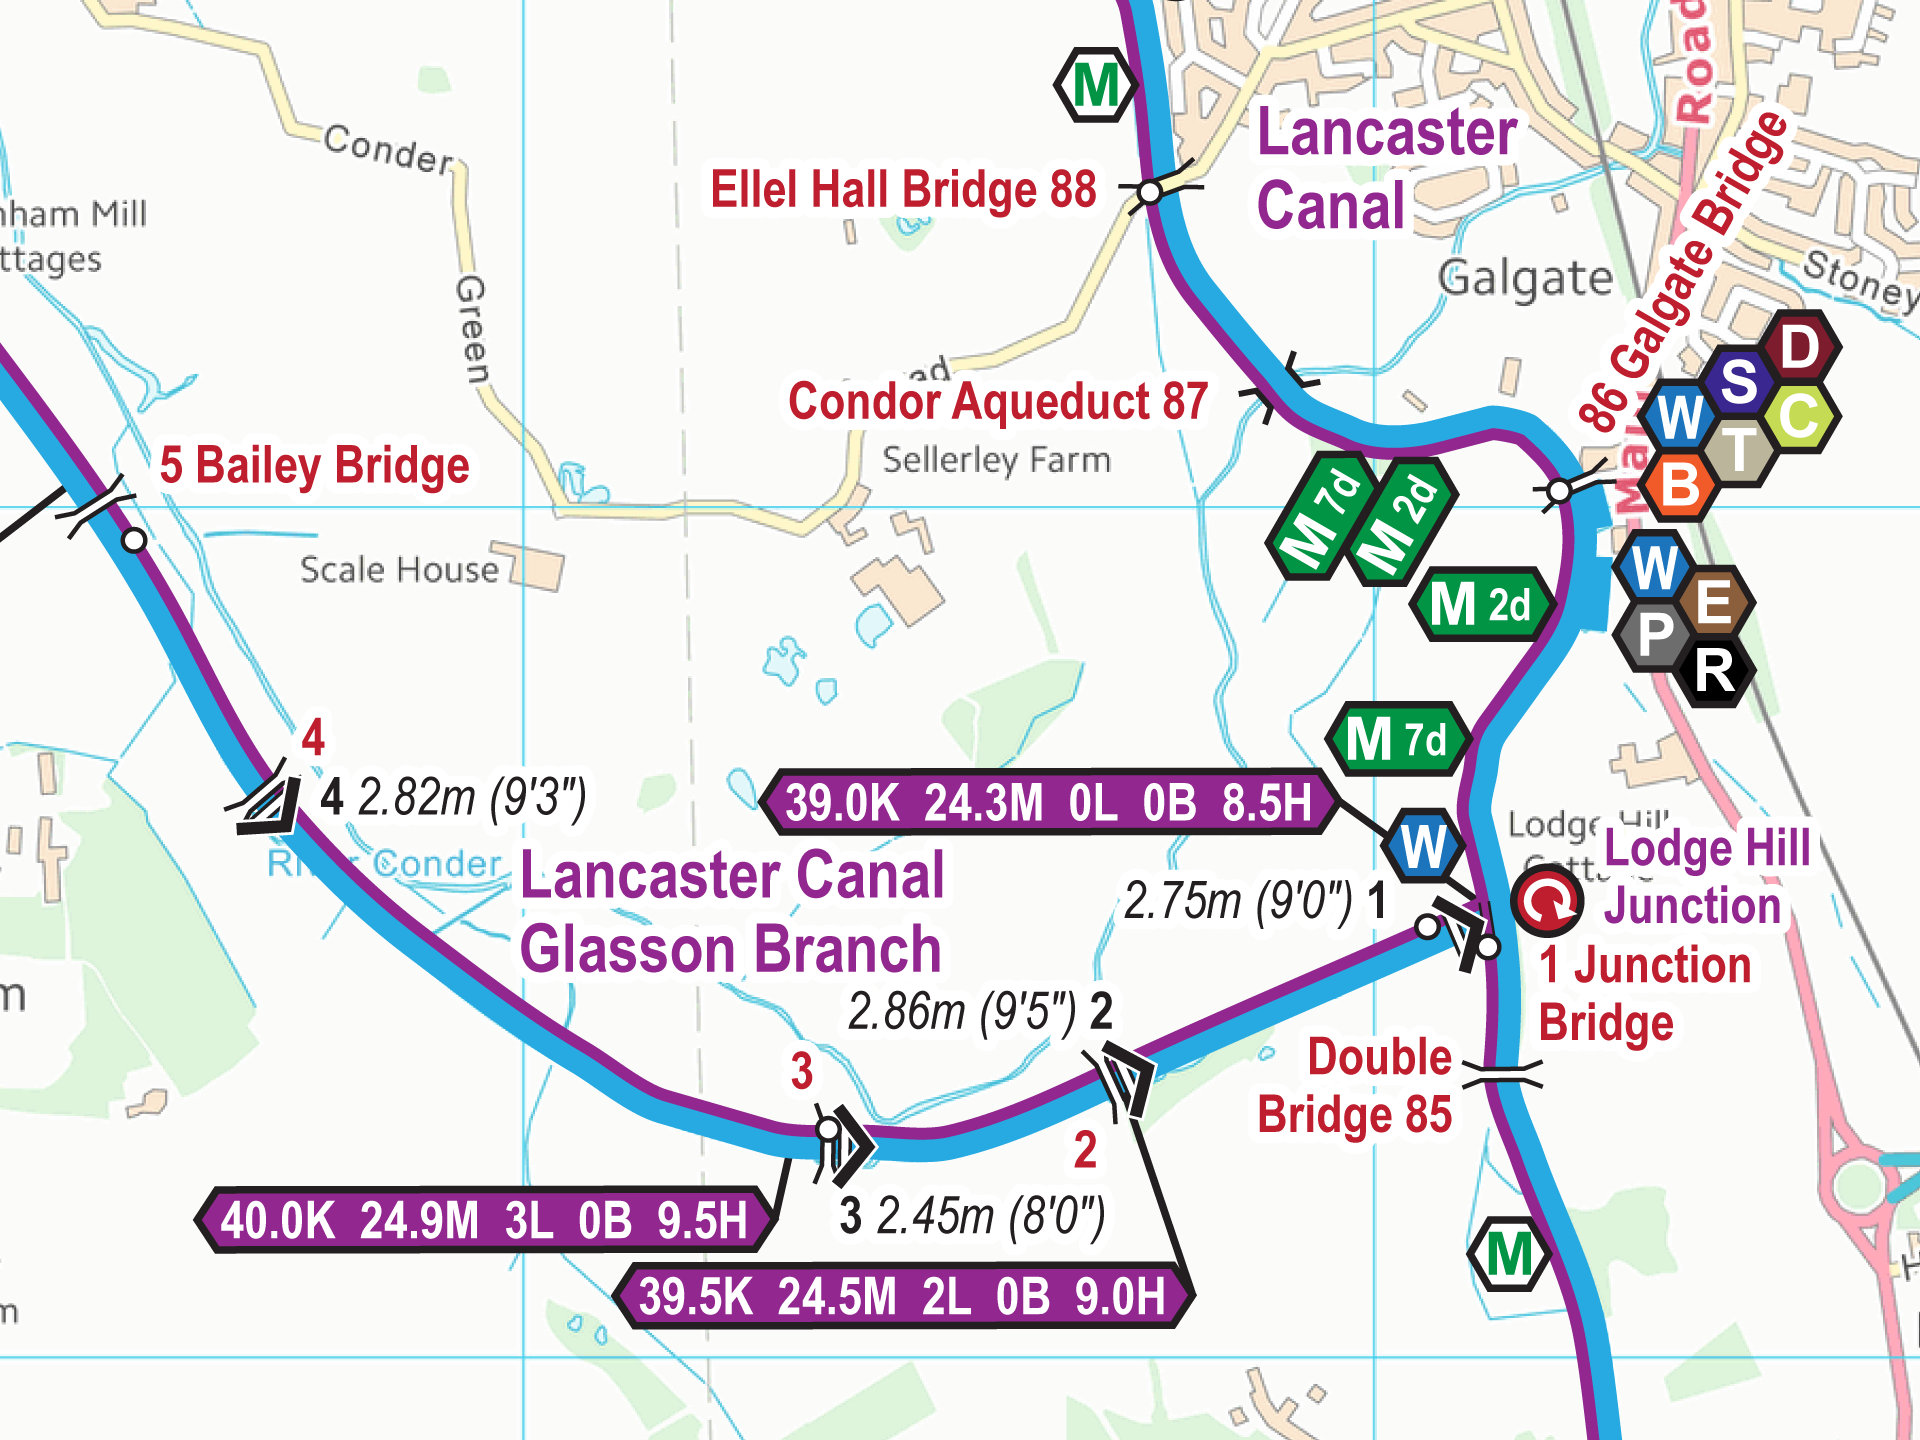 Extract from my Lancaster Canal Map in February 2022